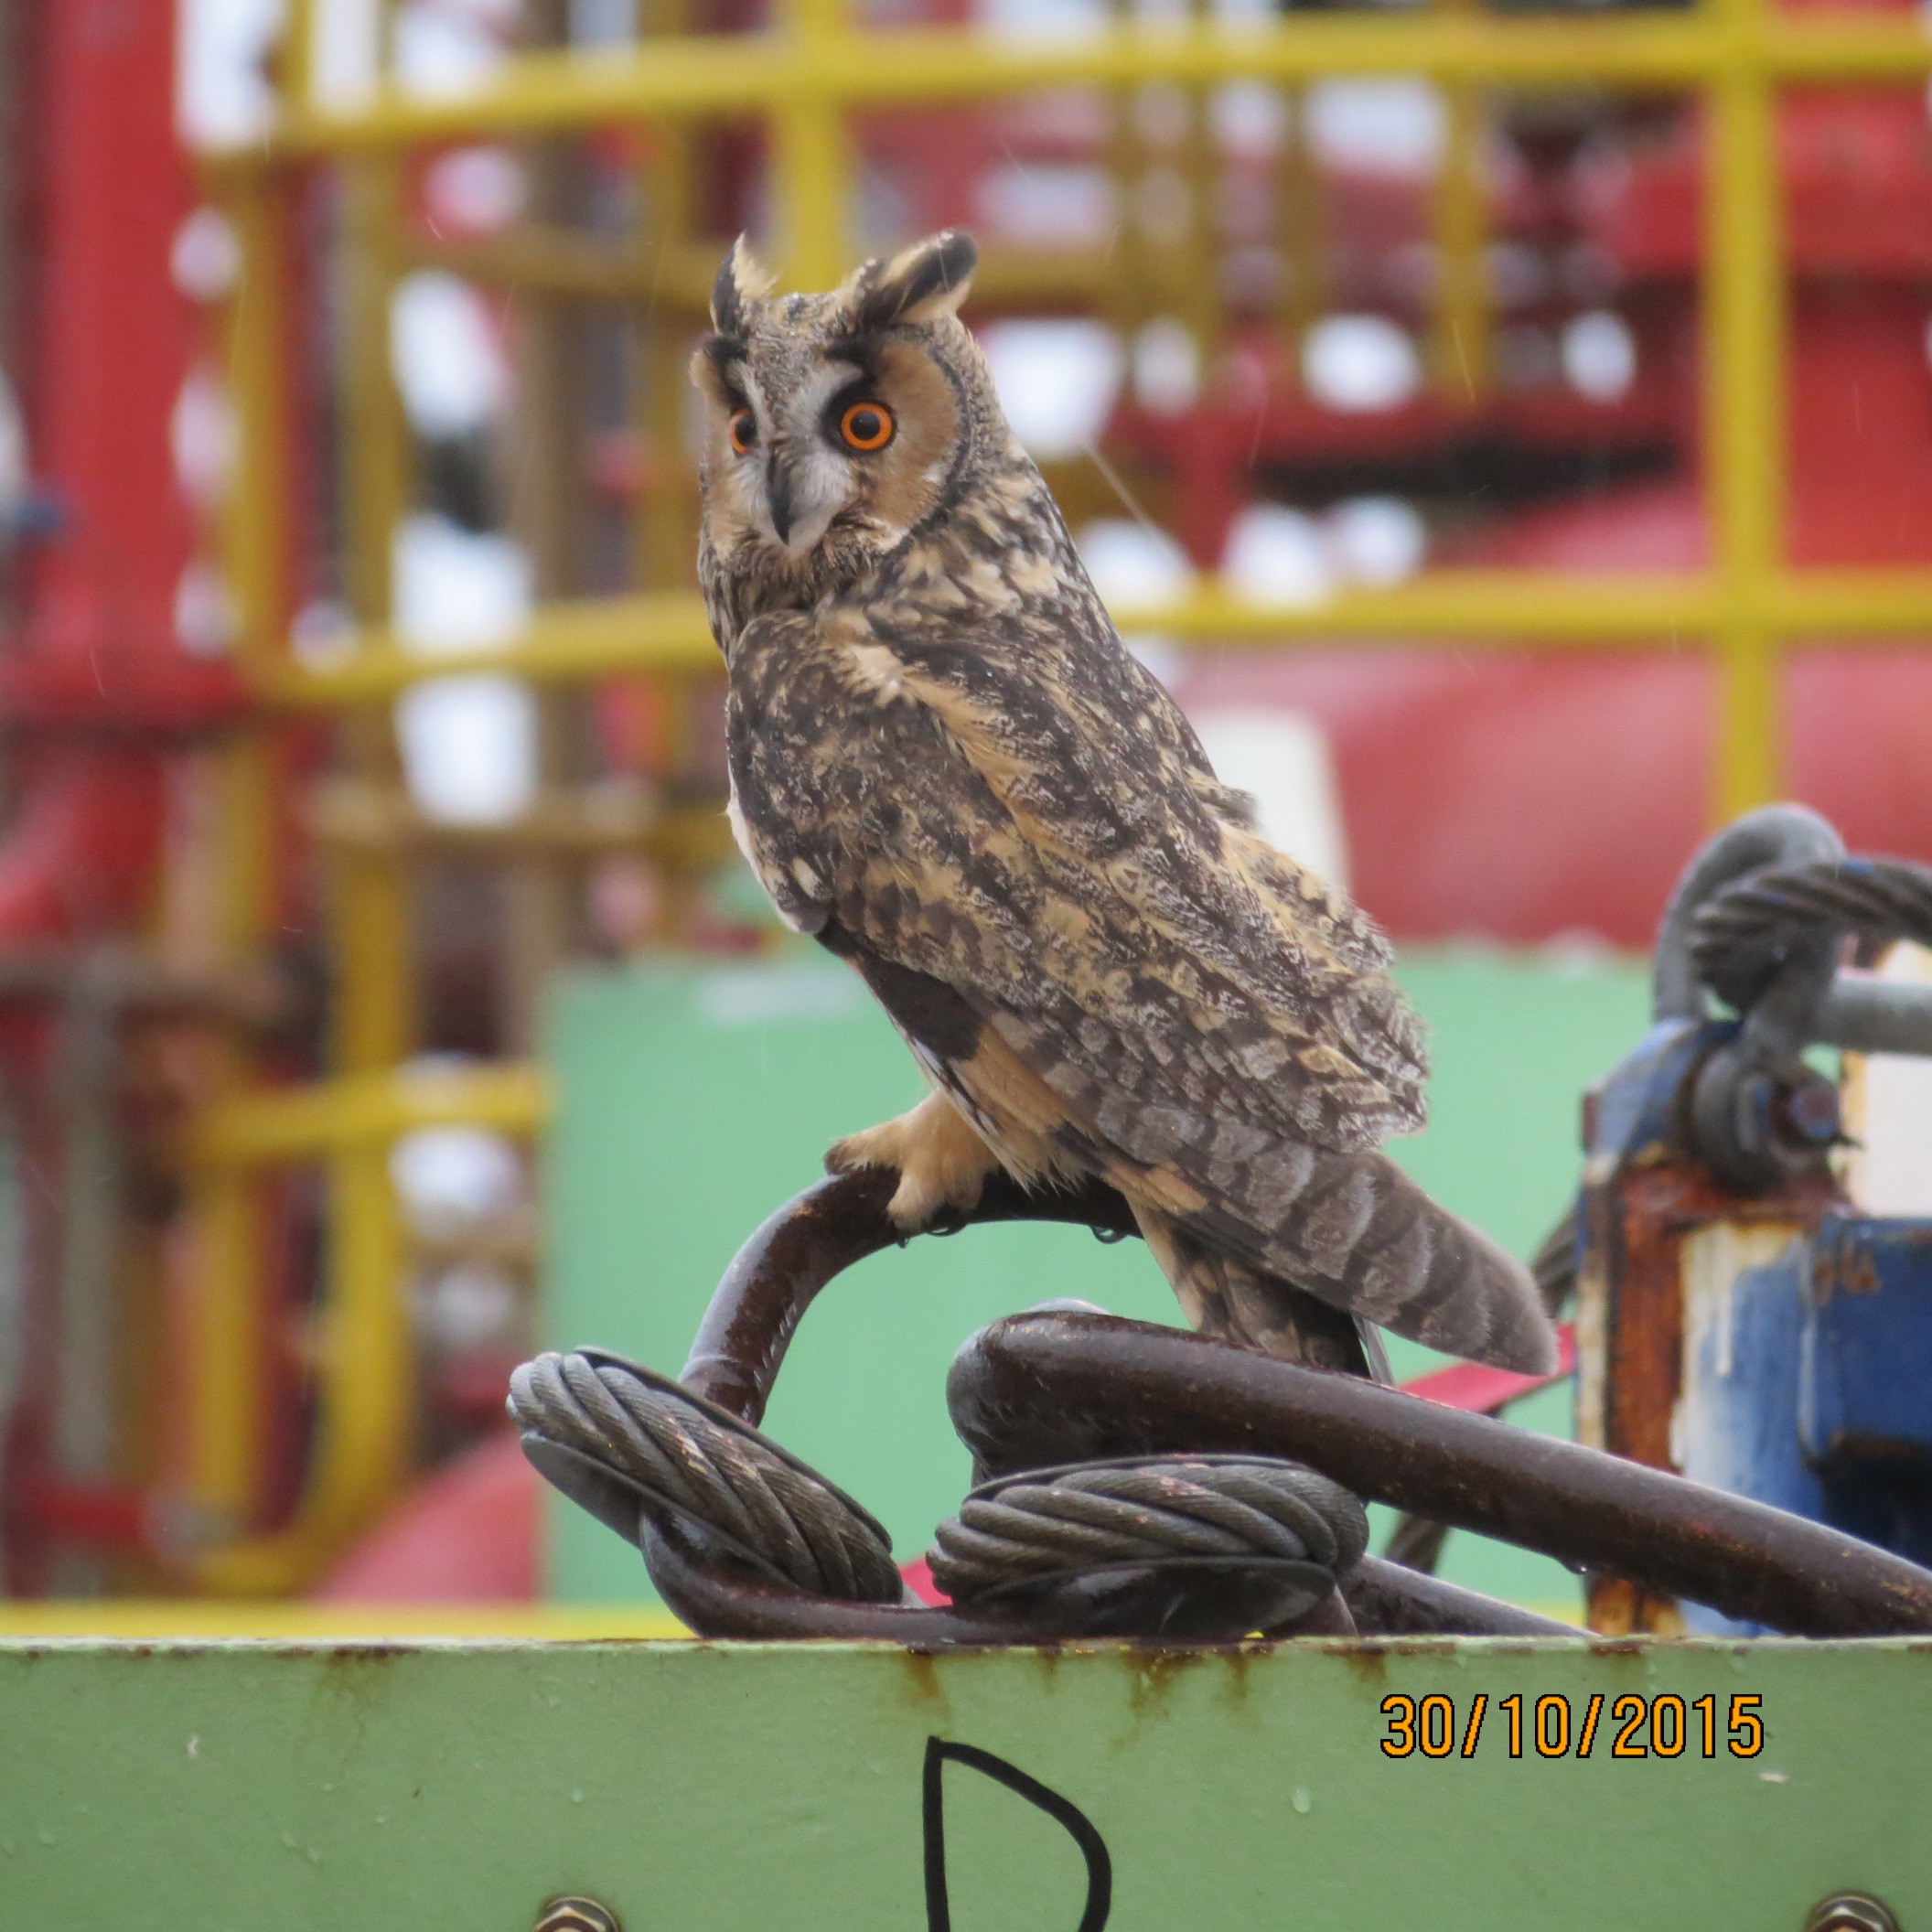 The North Sea is home to diverse wildlife, not least the family of owls spotted on the BW Athena